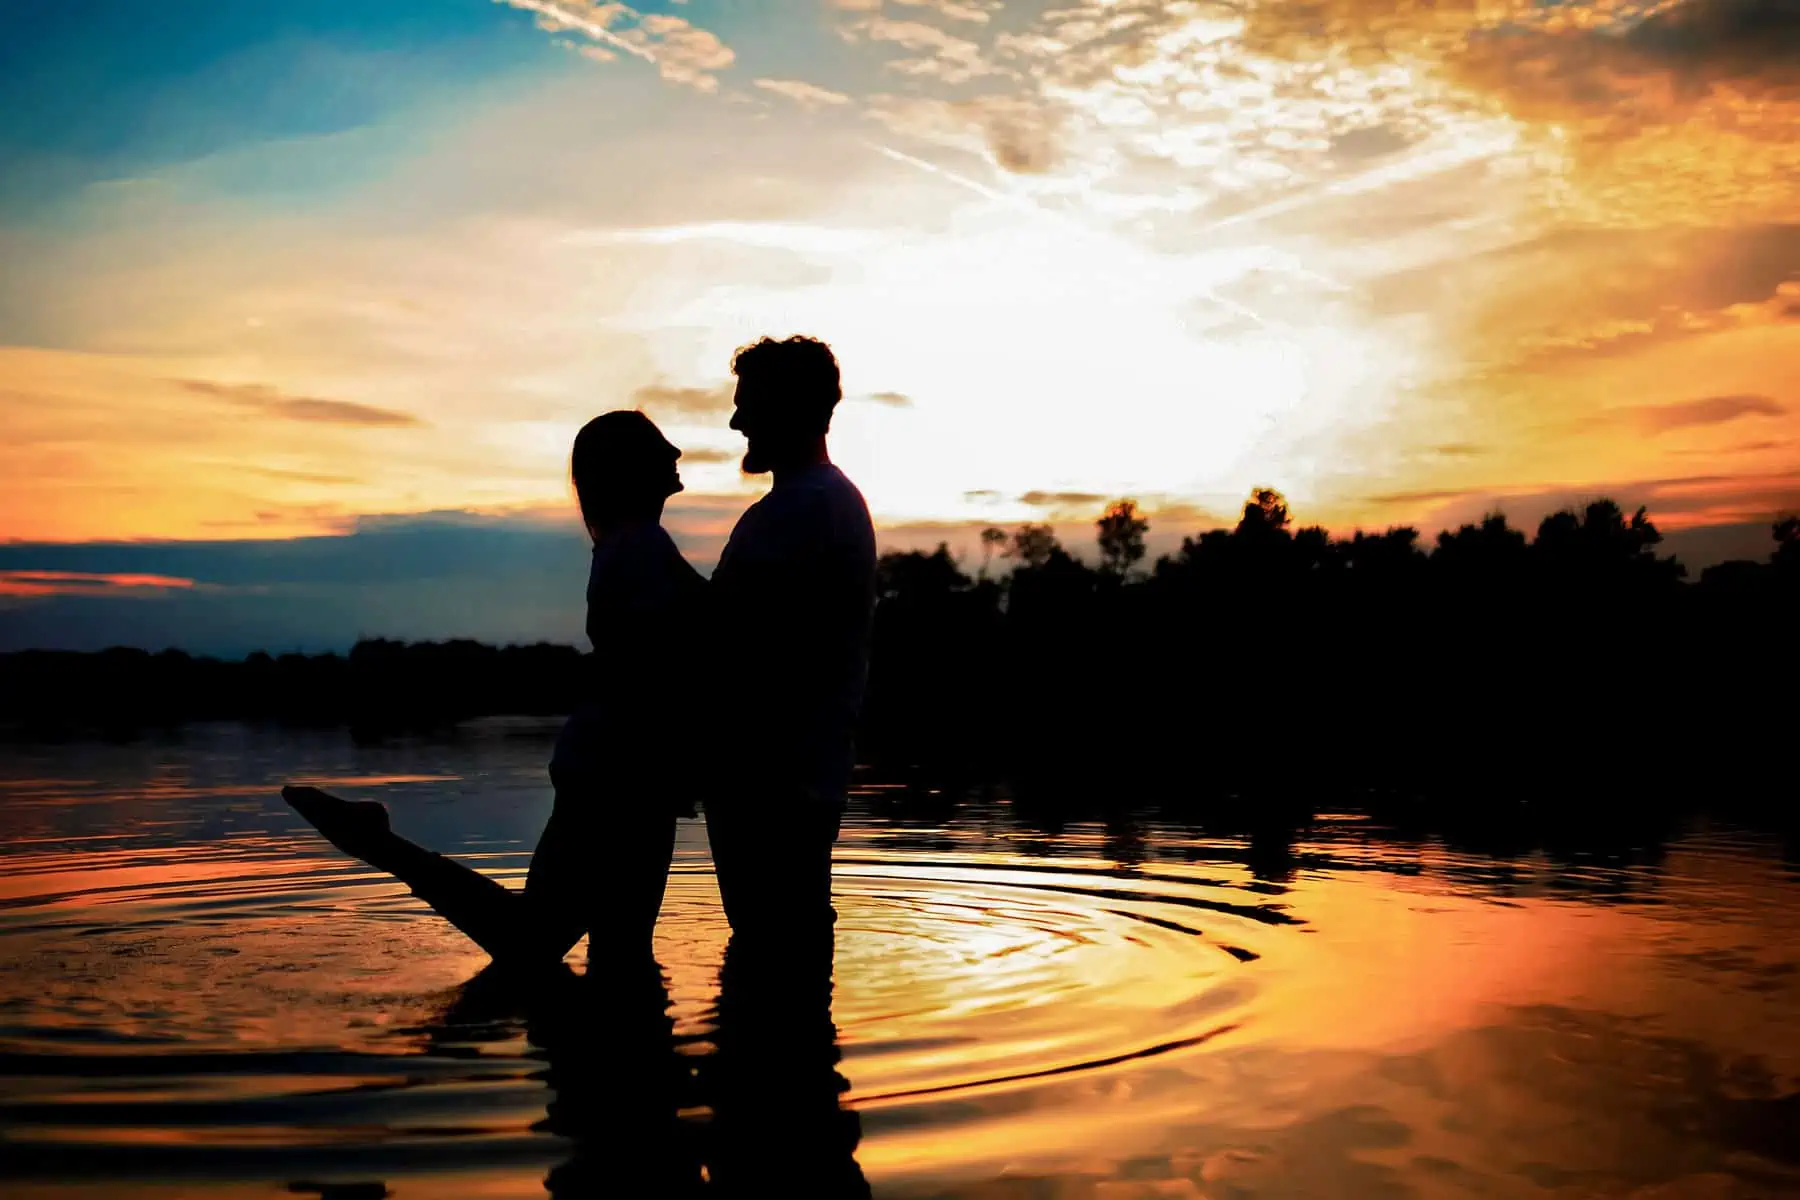 A man and woman standing in the water at sunset.